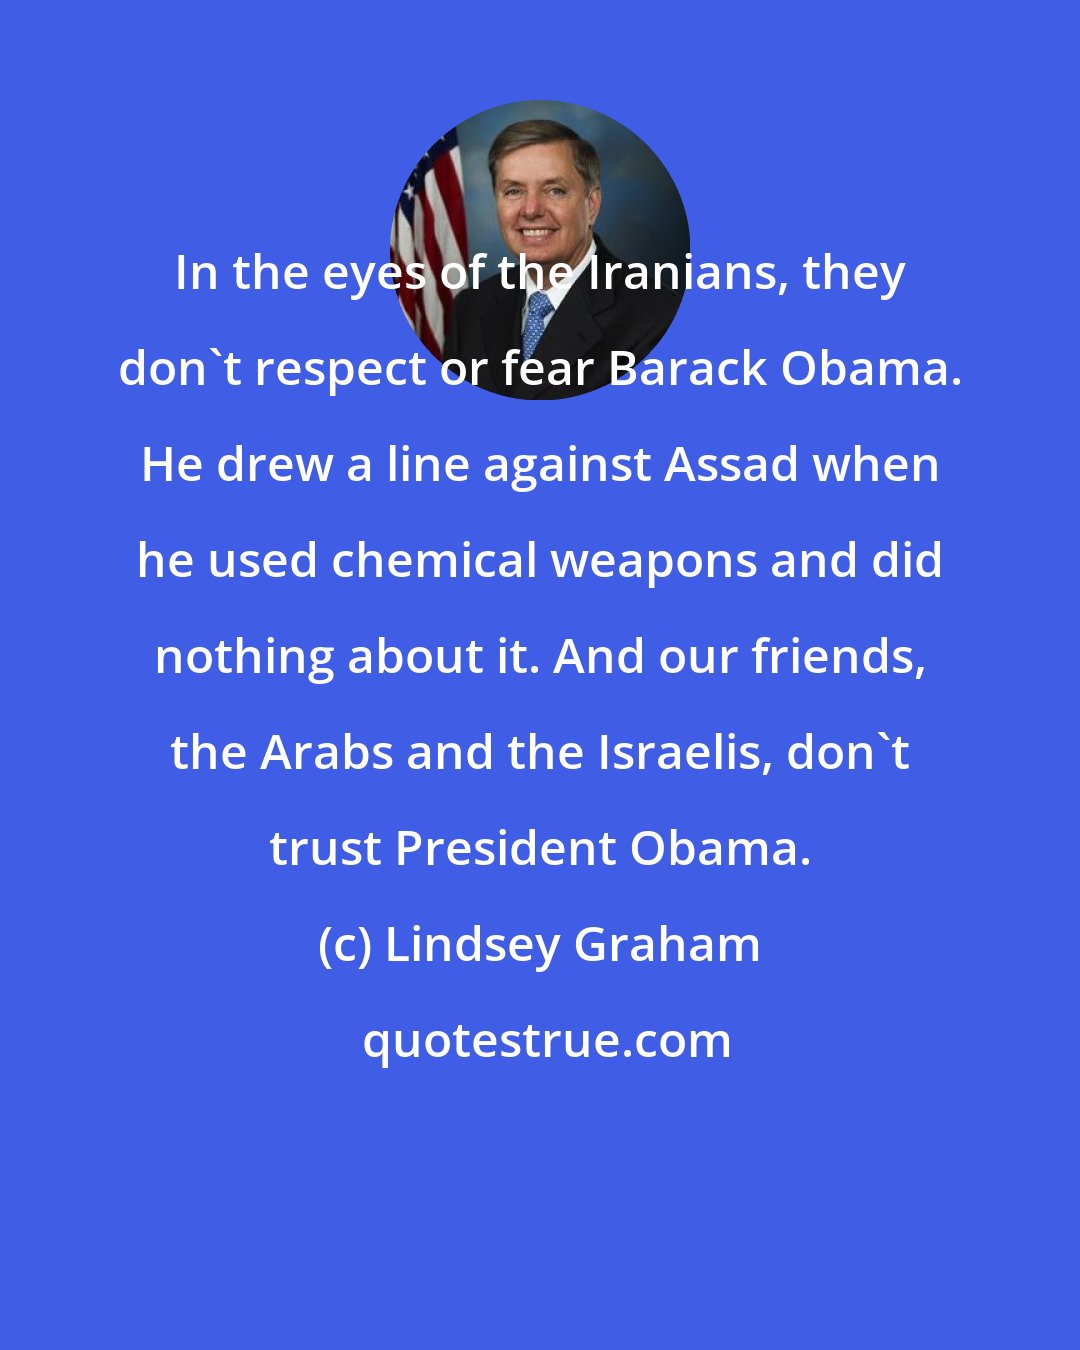 Lindsey Graham: In the eyes of the Iranians, they don't respect or fear Barack Obama. He drew a line against Assad when he used chemical weapons and did nothing about it. And our friends, the Arabs and the Israelis, don't trust President Obama.